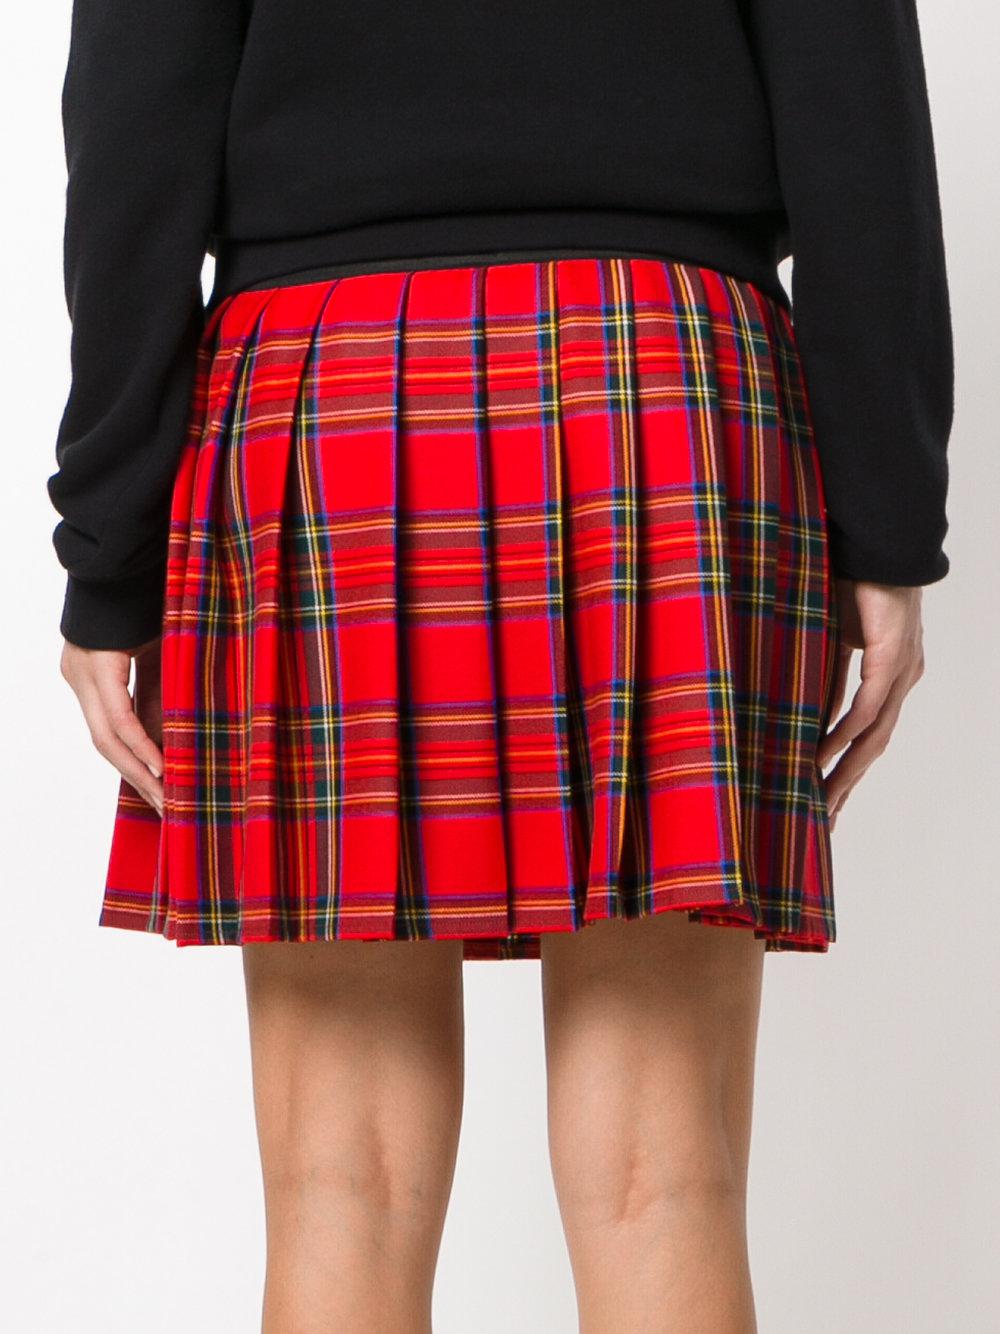 P.A.R.O.S.H. Wool Pleated Tartan Skirt in Red - Lyst